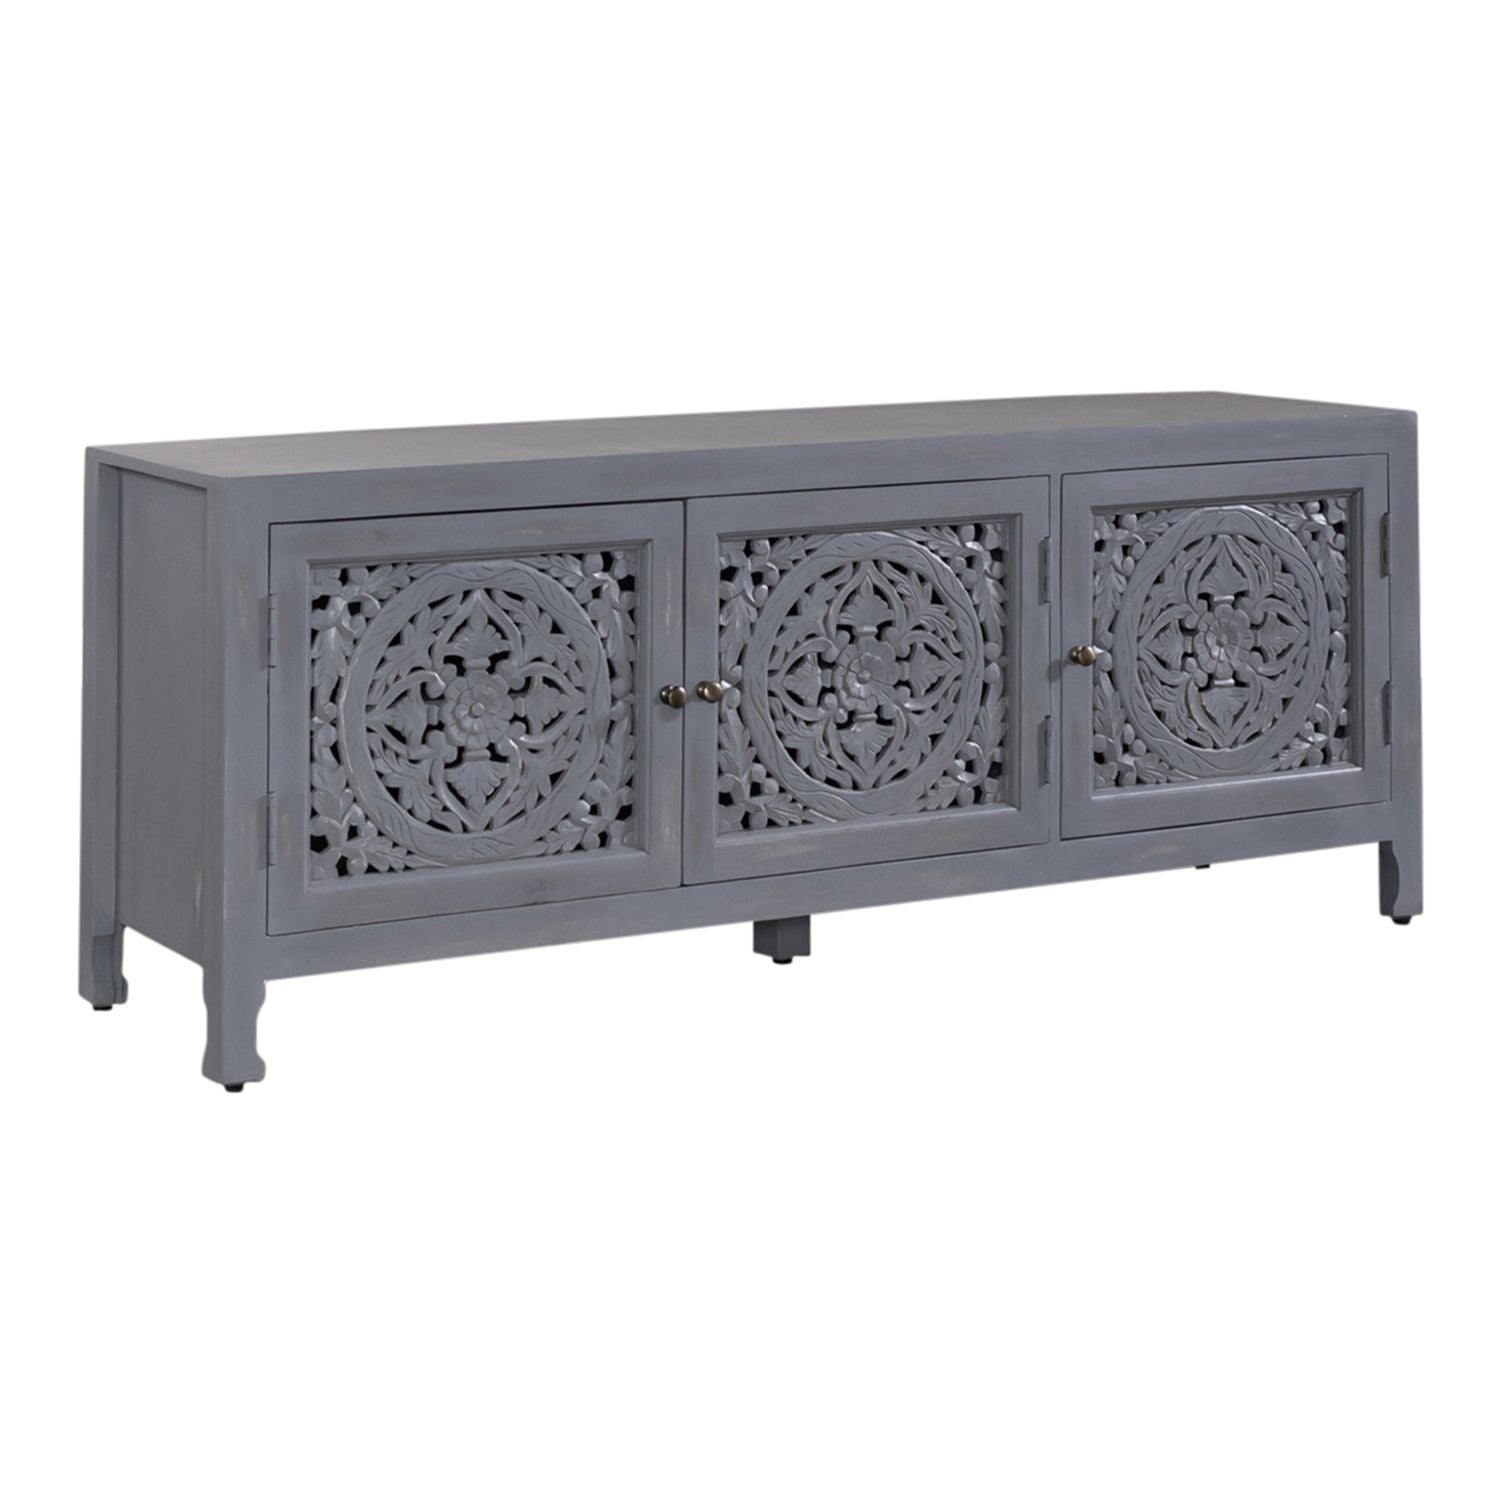 Marisol 65 Inch 3 Door Accent TV Stand by Liberty